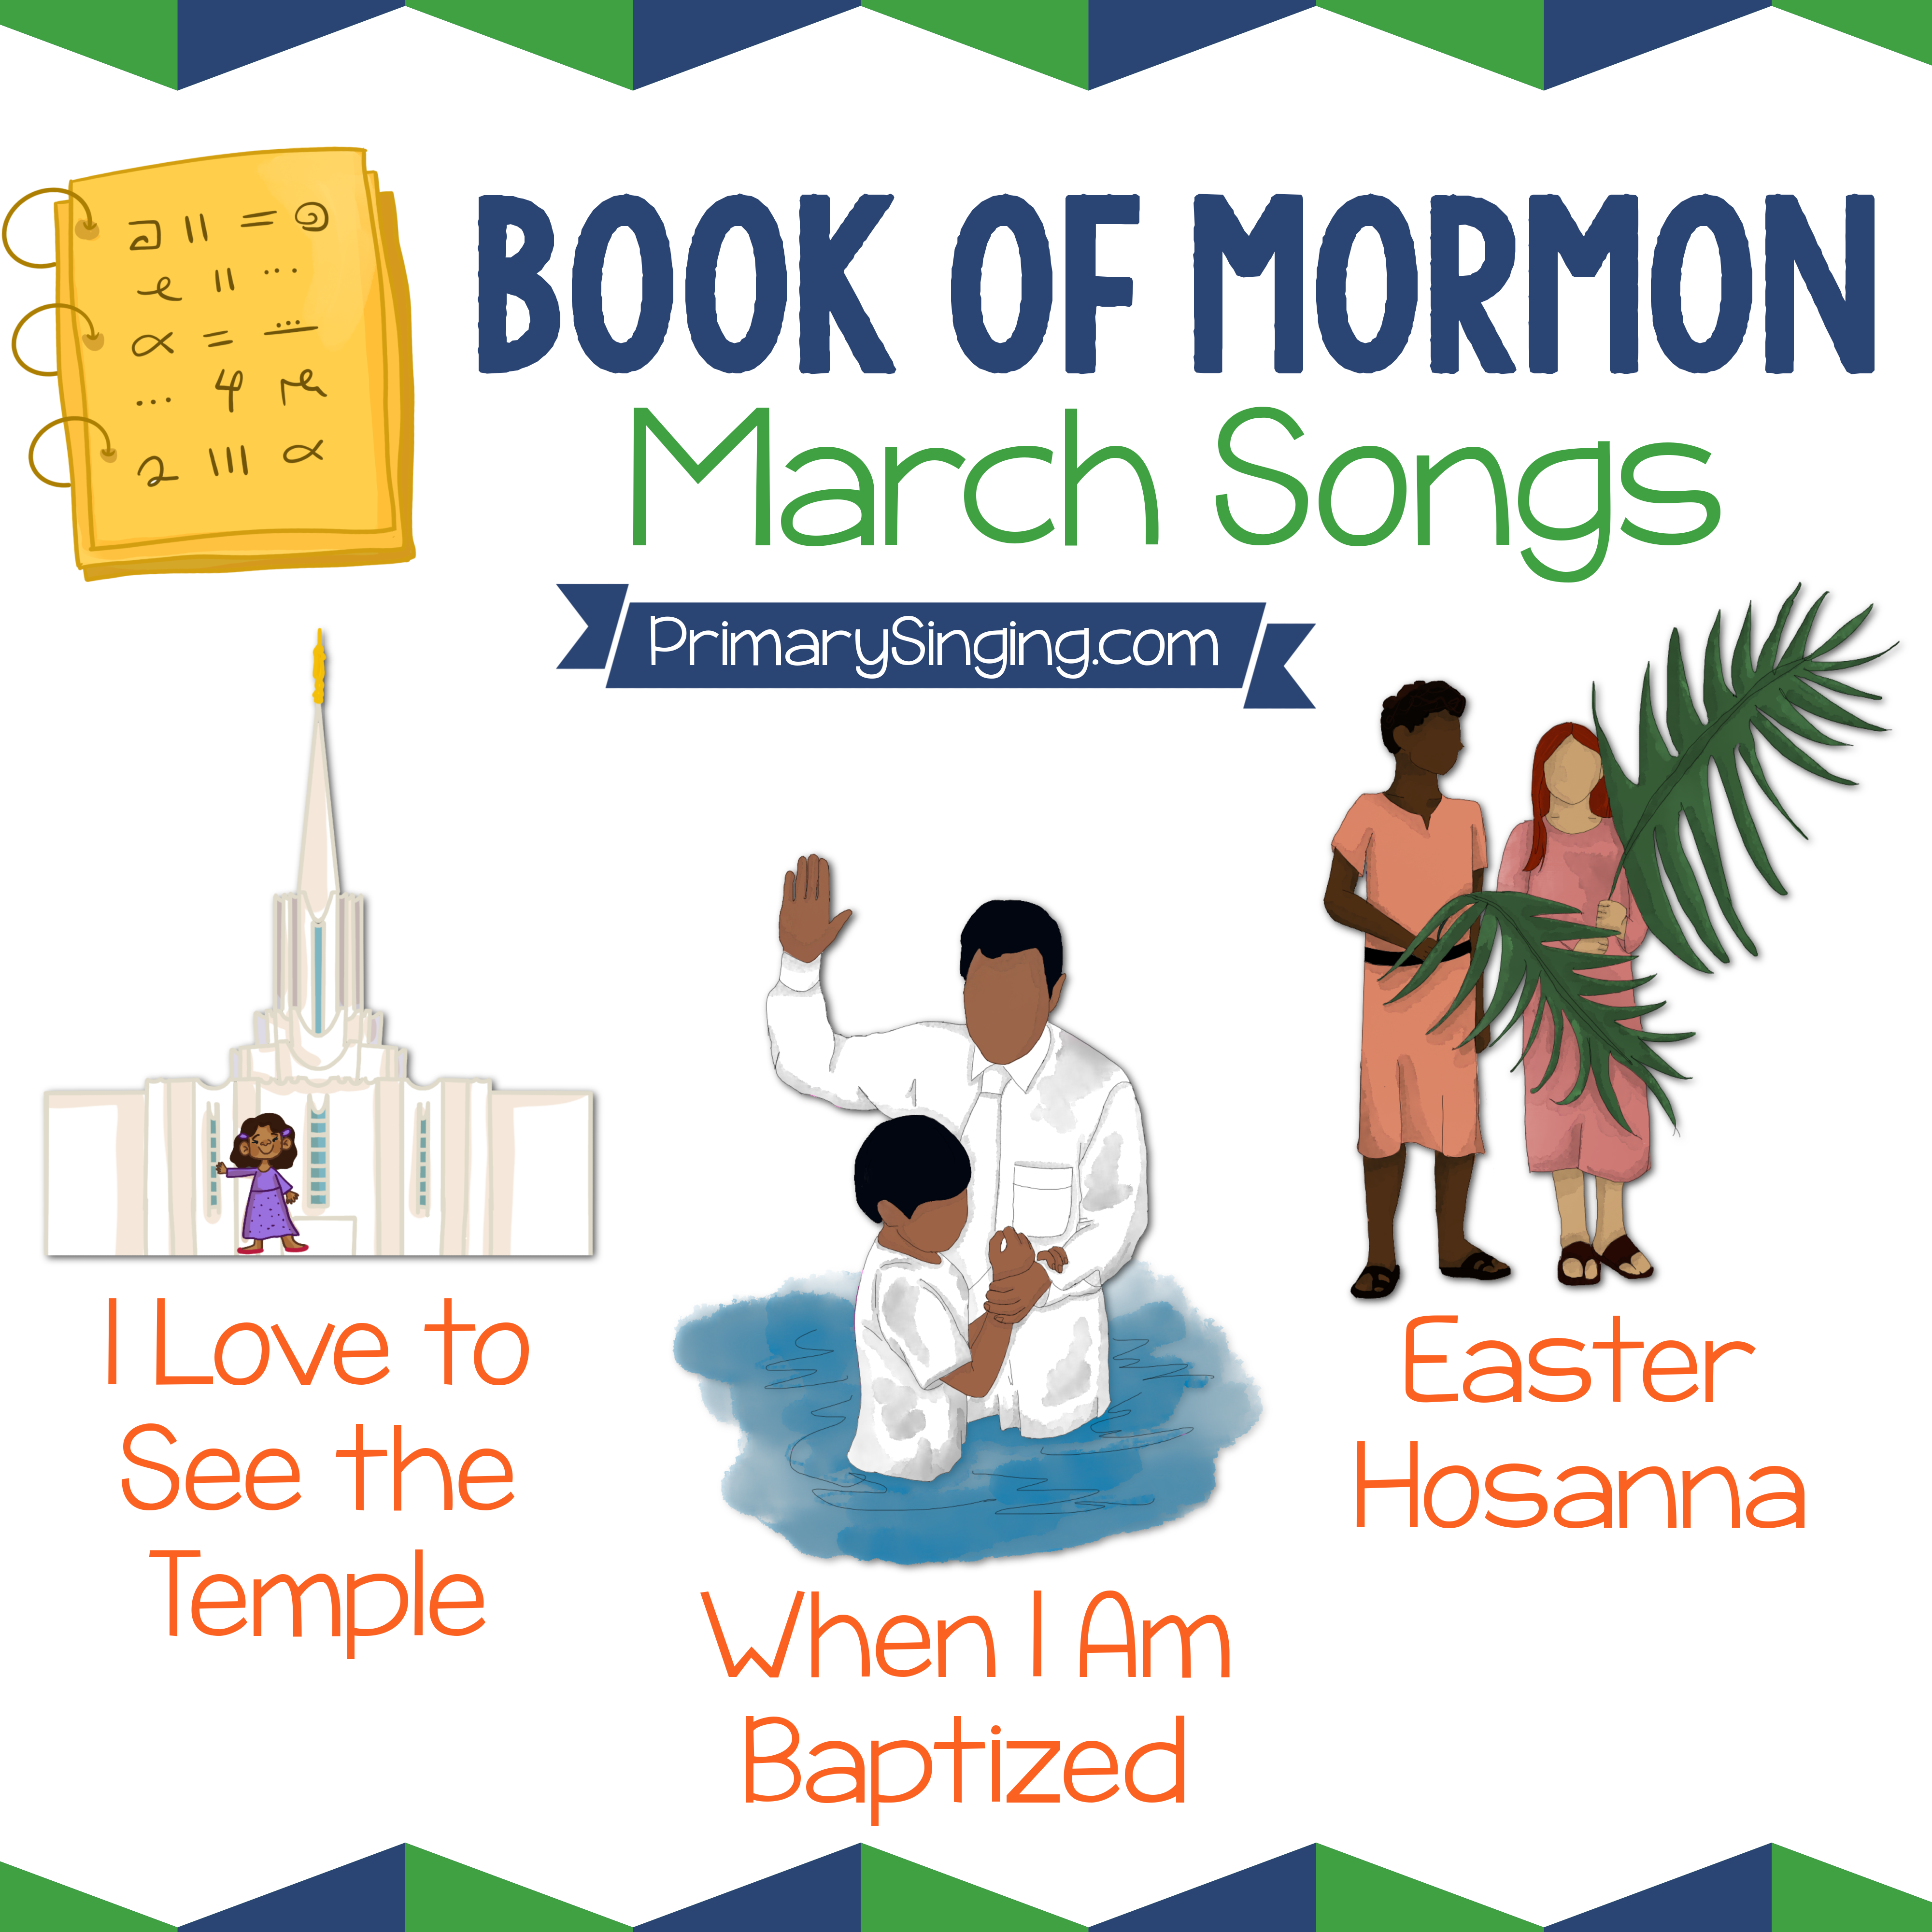 Book of Mormon March Song List - I Love to See the Temple, When I Am Baptized, Easter Hosanna. Teach these 3 great Primary songs during Singing Time or home Come Follow Me lessons.